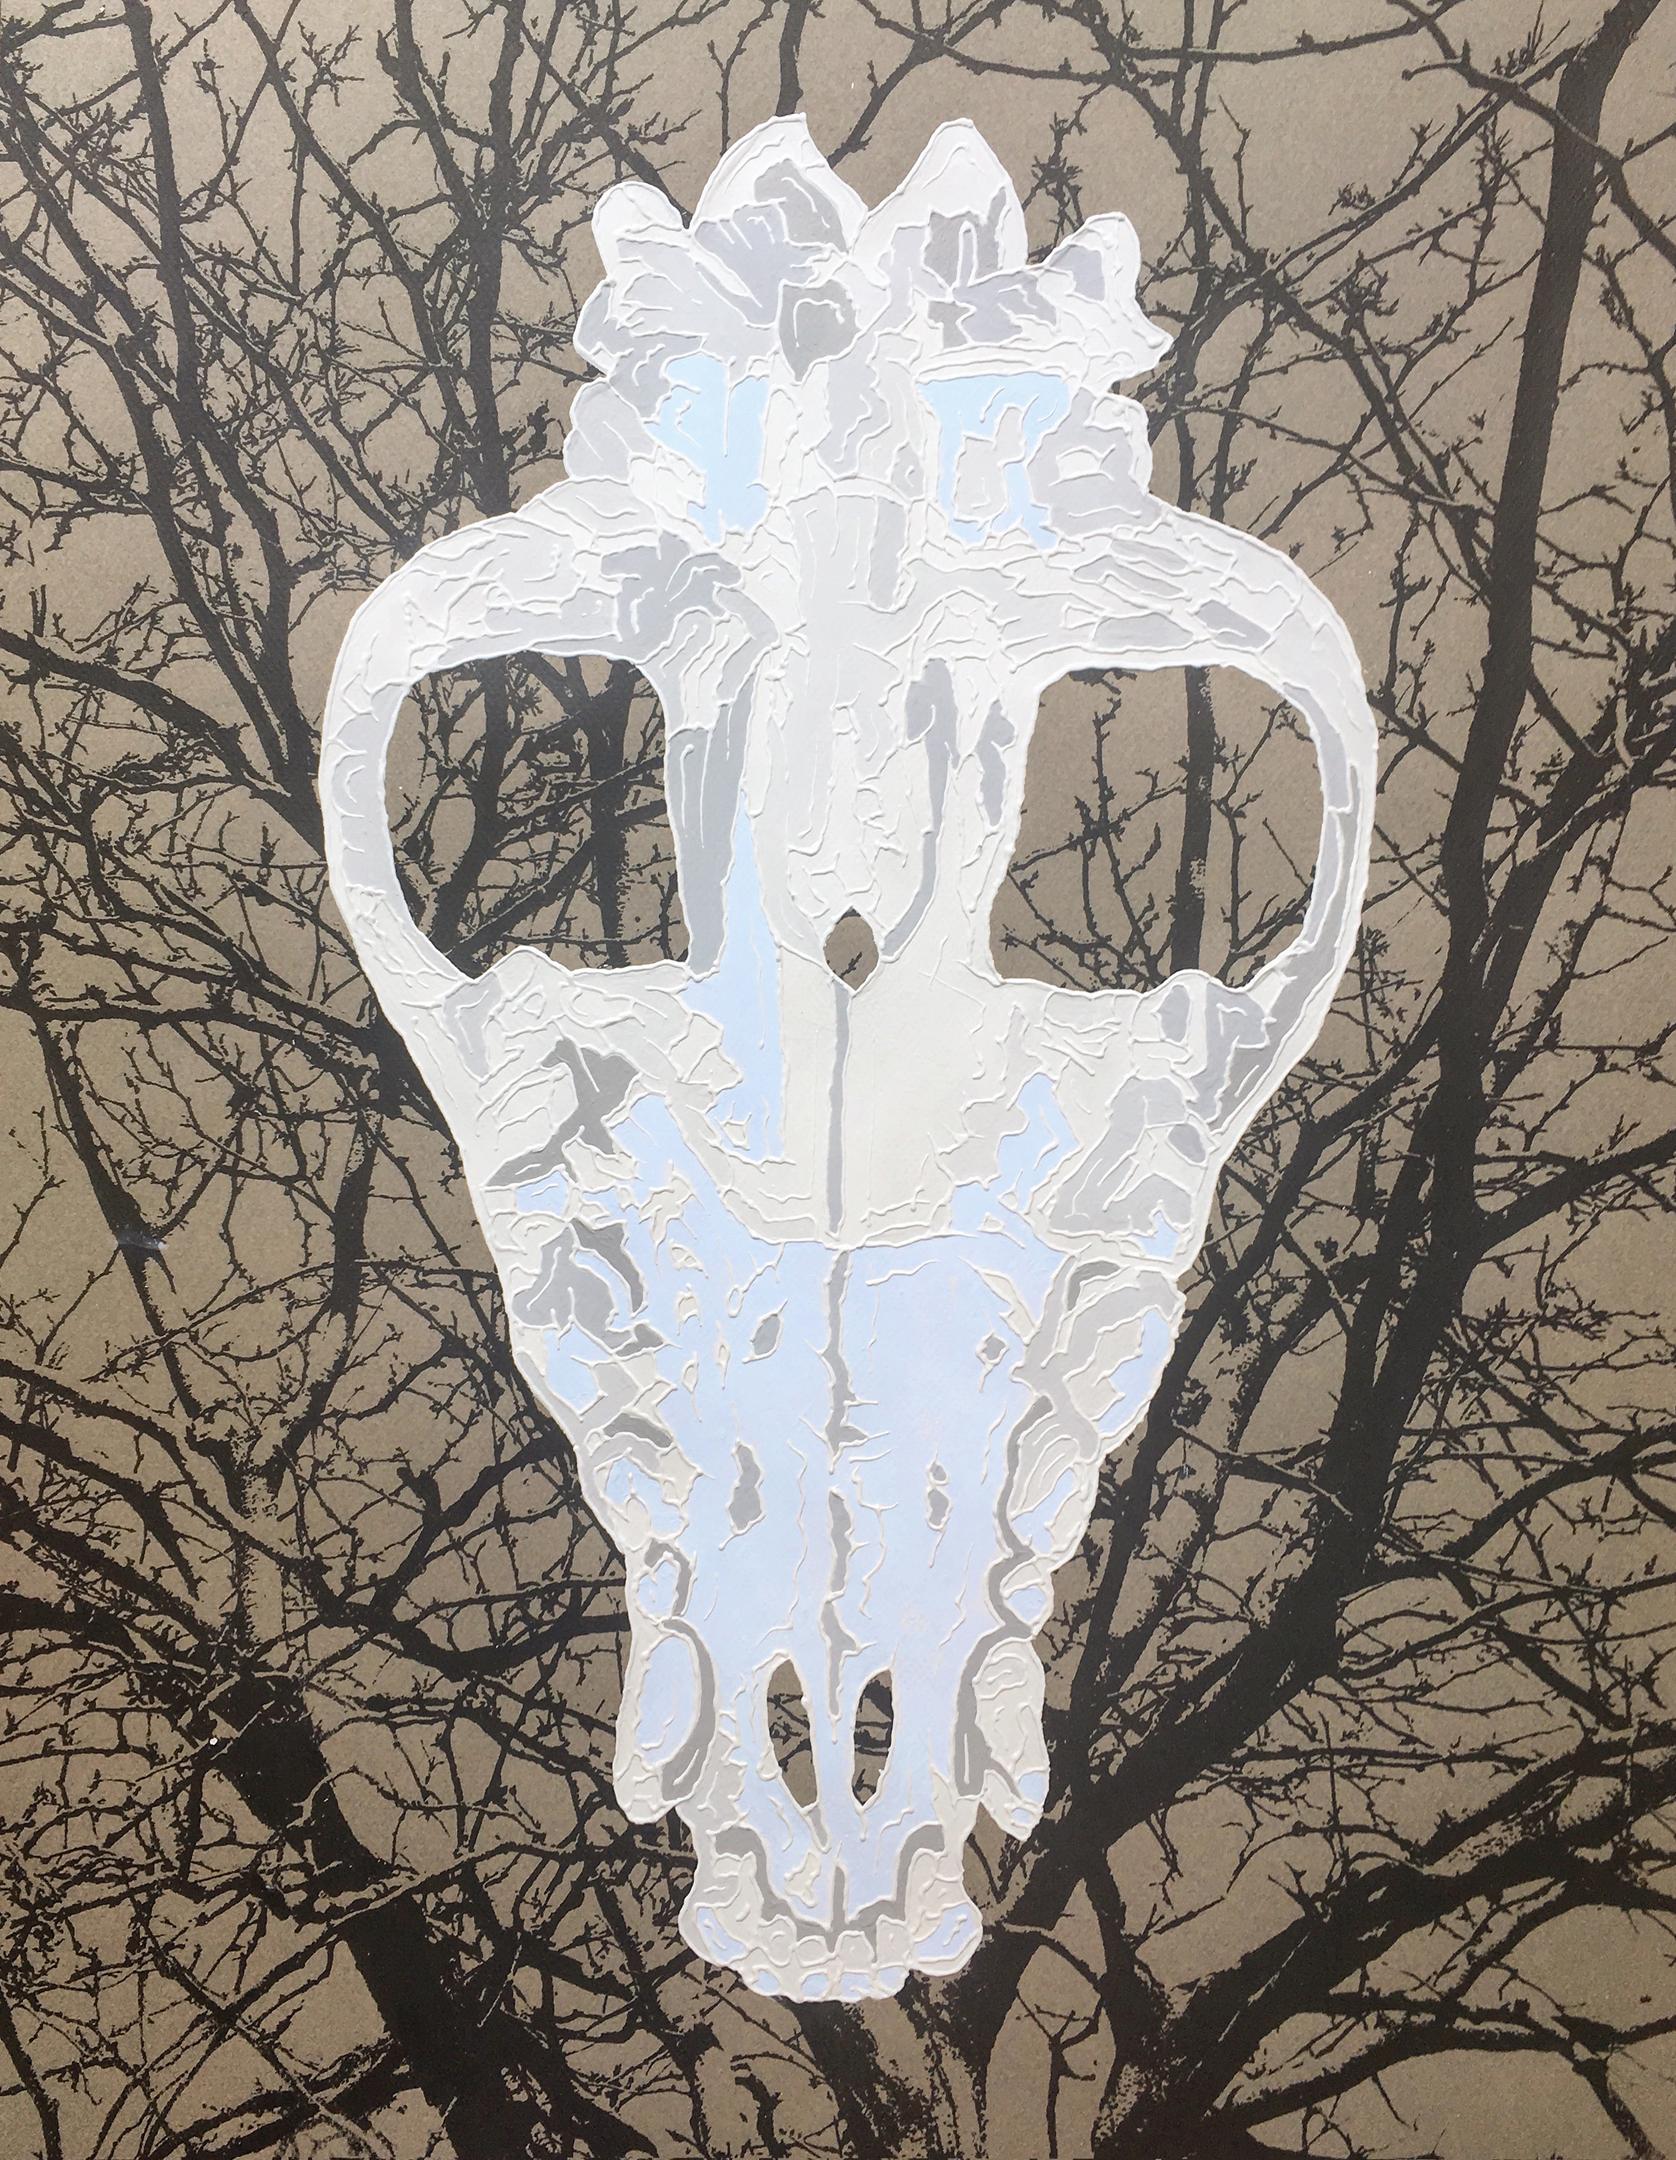 J Ivcevich, Trail Natural History (Canine Invert), mixed media on paper, 2018 - Mixed Media Art by J. Ivcevich